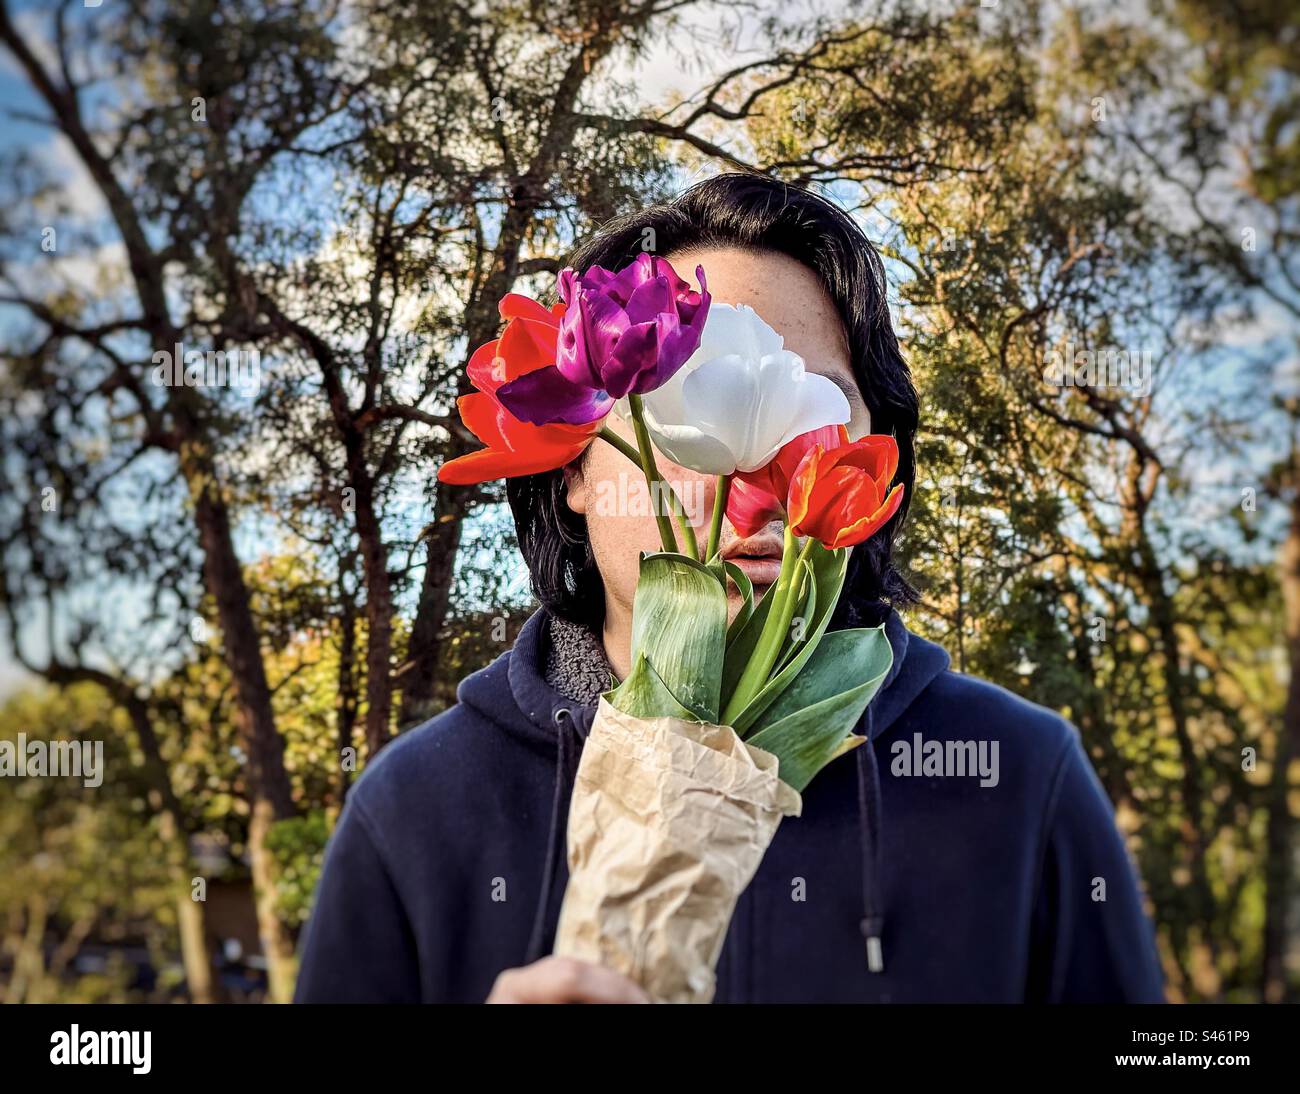 Portrait of young man holding a bouquet of four multicolored tulip flowers against trees and blue sky. Obscured face. Spring theme. Stock Photo